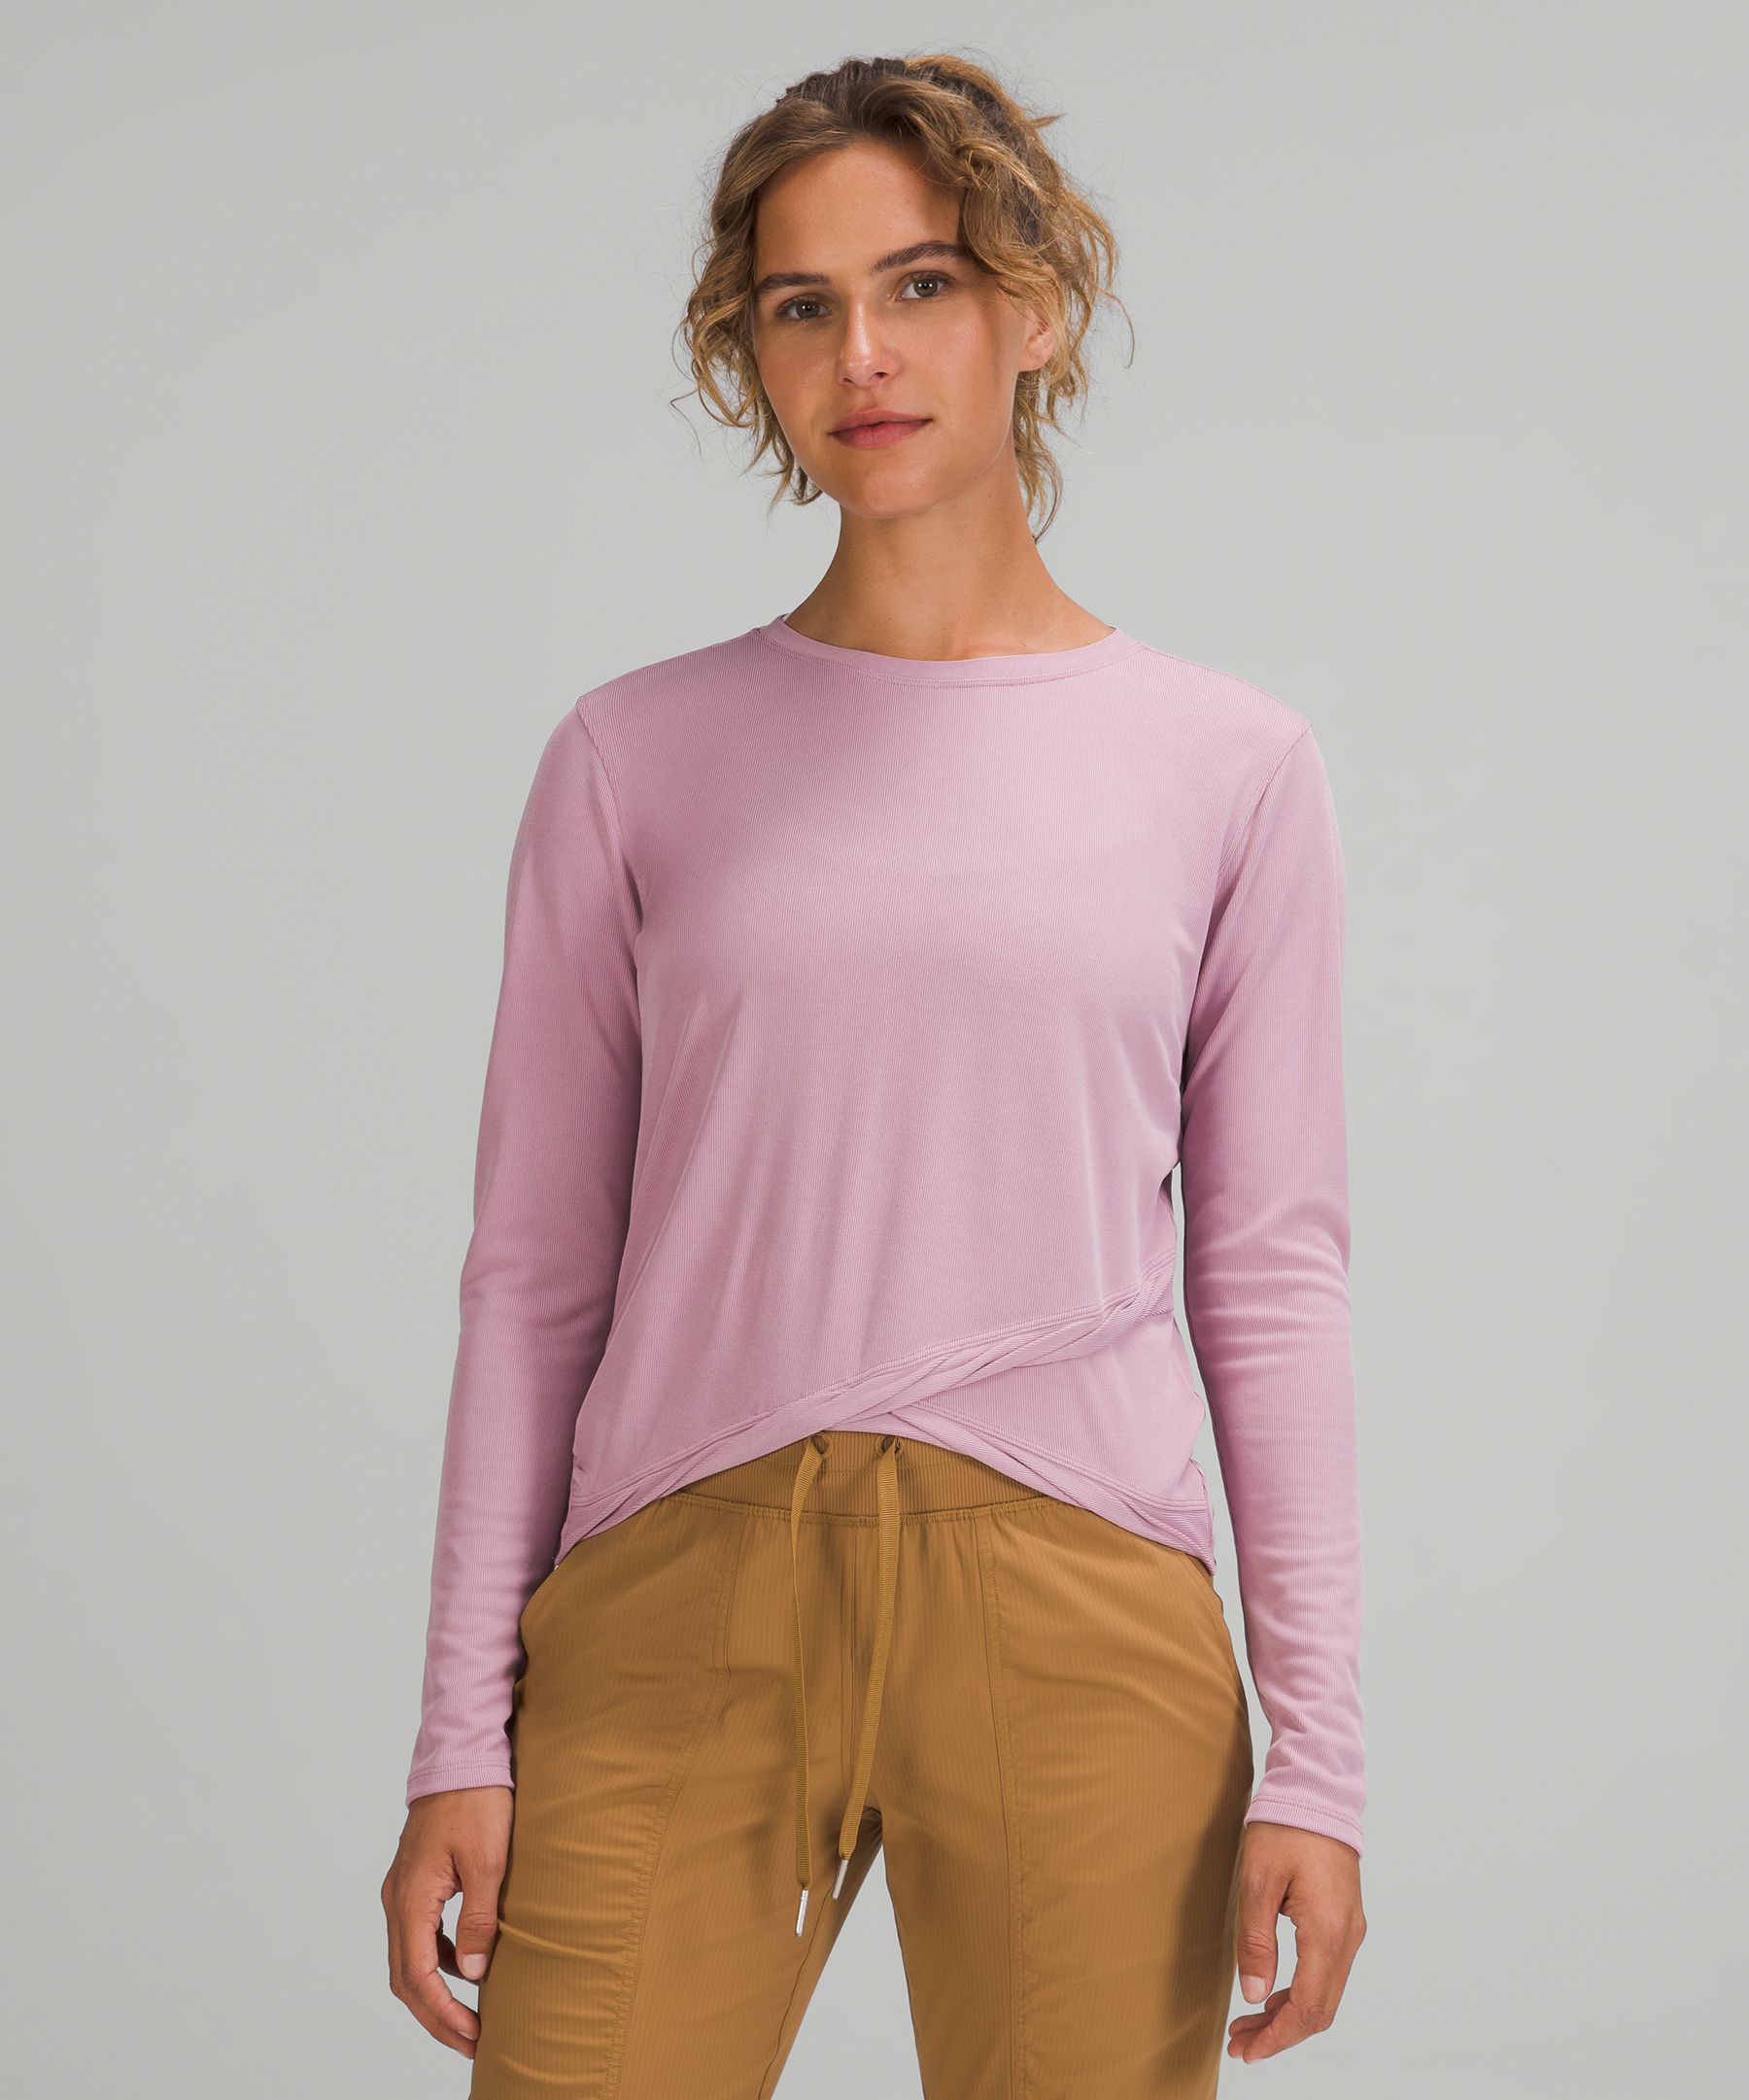 Lululemon Do The Twist Long Sleeve Shirt In Pink Taupe